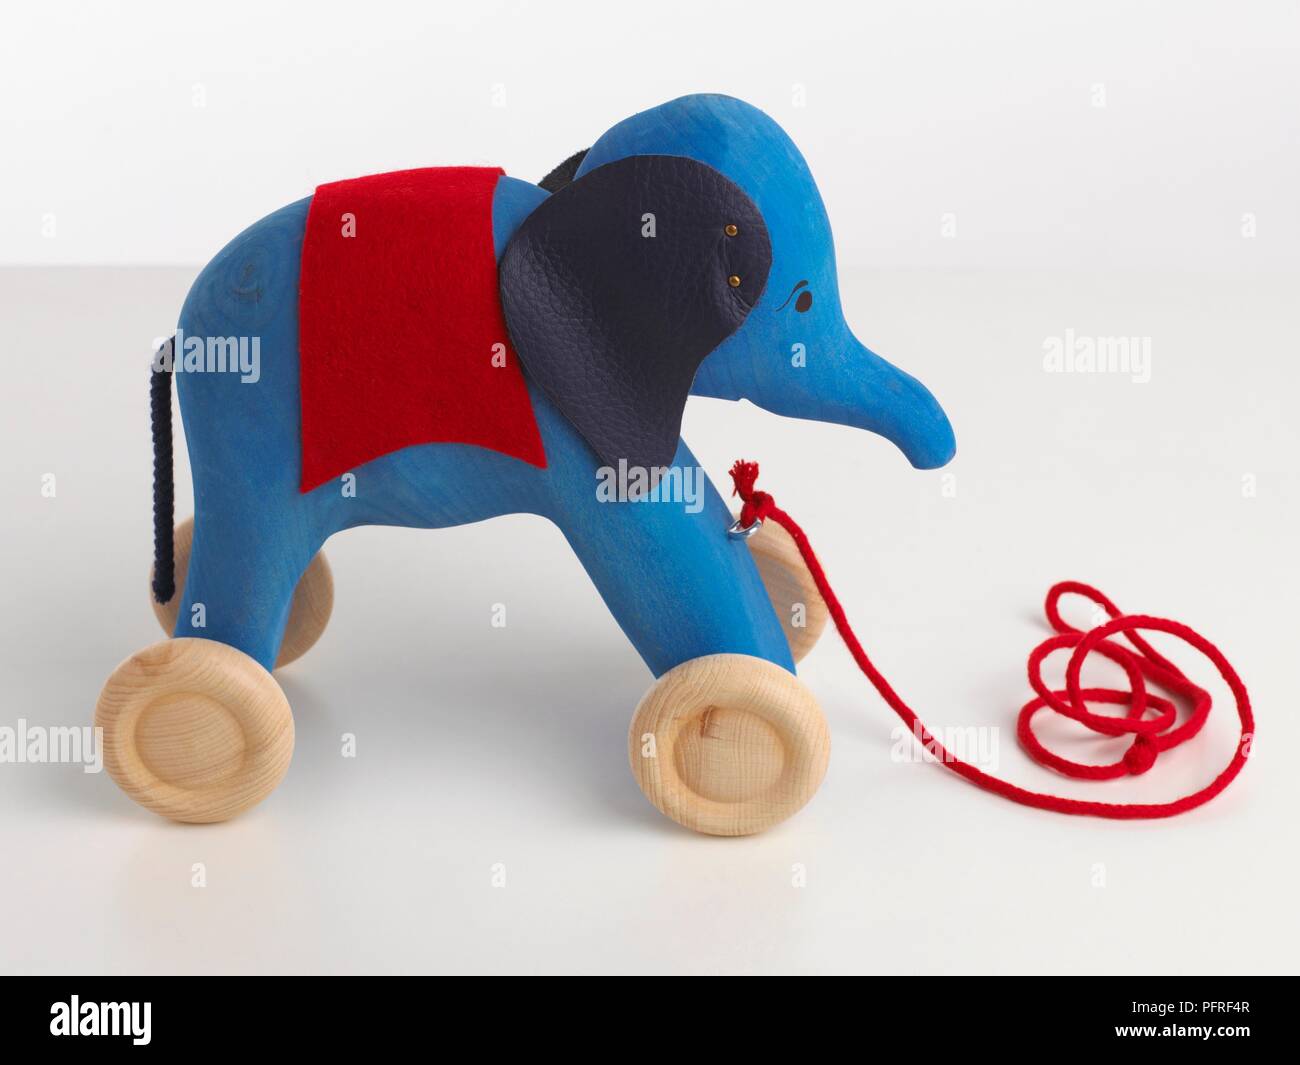 https://c8.alamy.com/comp/PFRF4R/blue-elephant-toy-on-wheels-with-red-string-to-pull-PFRF4R.jpg